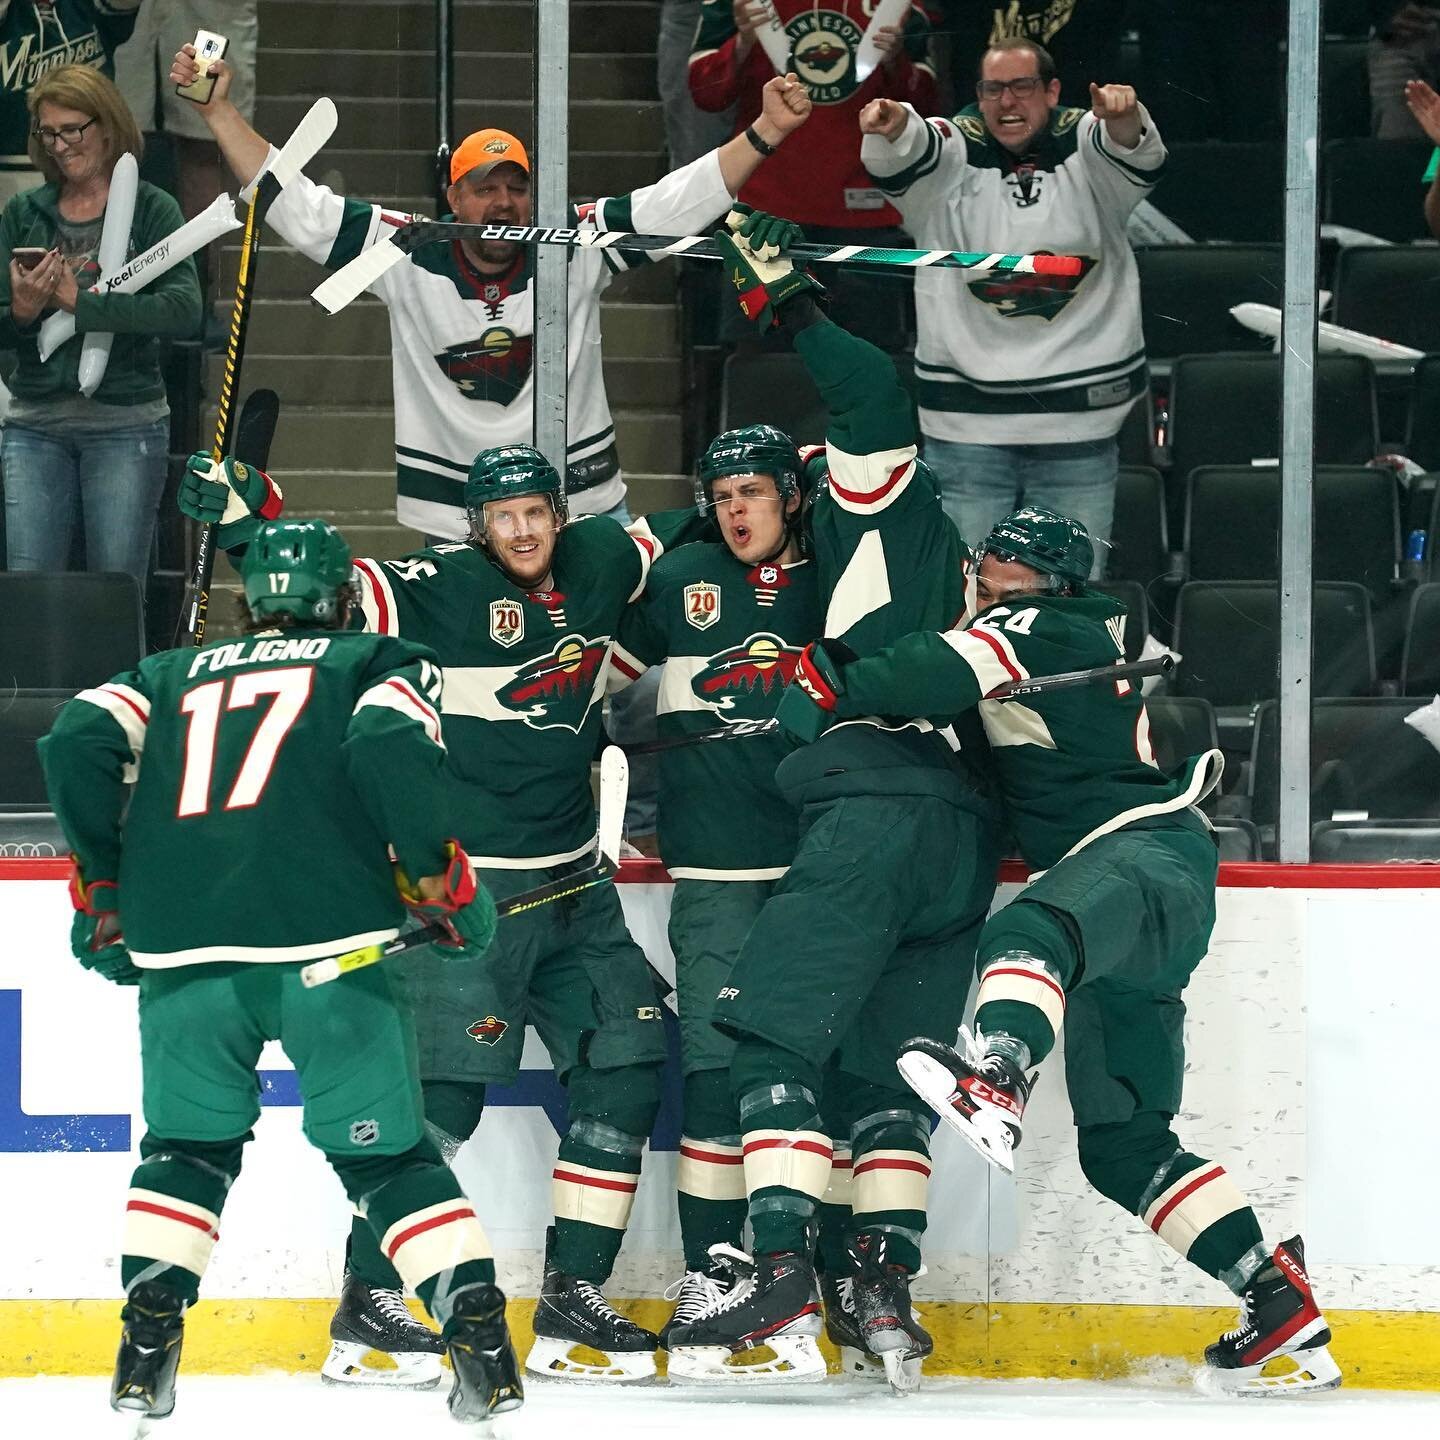 🏒 🚨 OFFICIAL @minnesotawild PRE-GAME &amp; WATCH PARTY 3/18 &amp; 3/19 🚨 🏒 

Join @minnesotawild &amp; @thenchc at The Apostle for the ultimate tailgate before heading across the street to @xcelenergyctr for the Saturday 3/18 1:00pm @minnesotawil